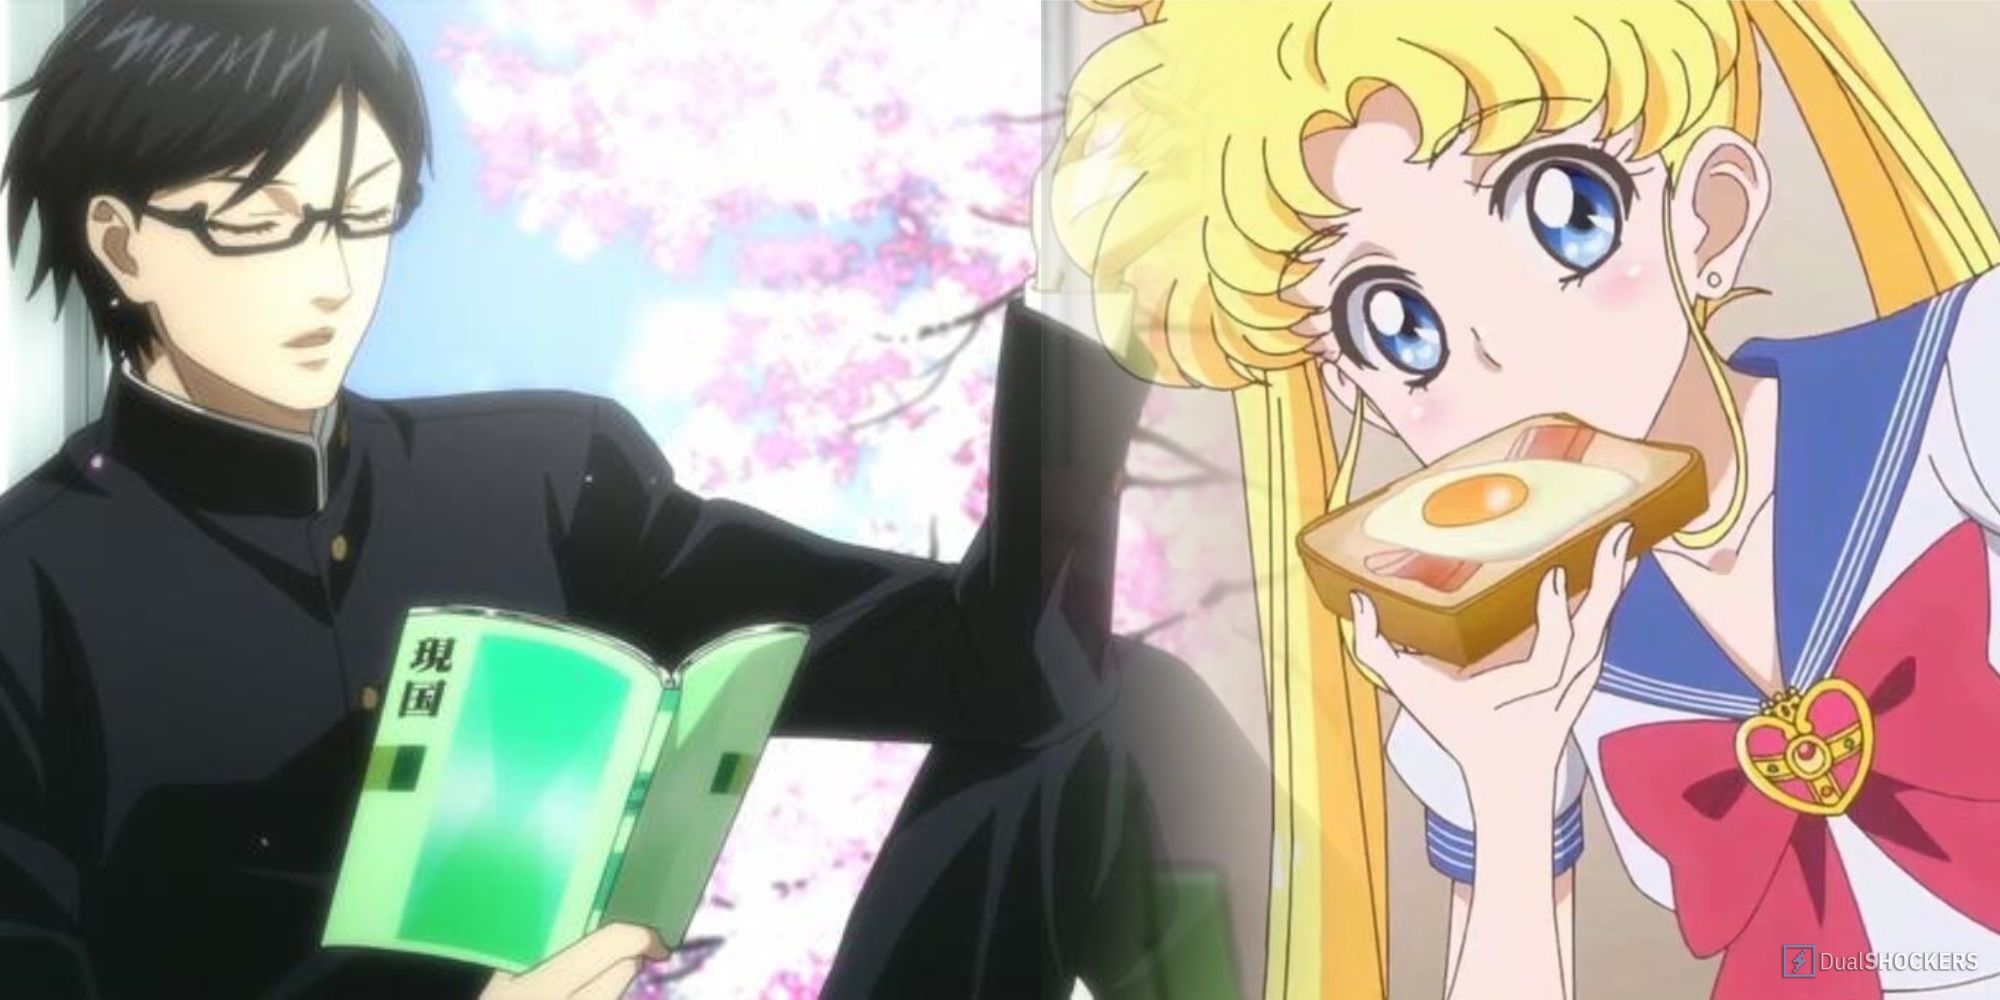 Anime Cliches: Sakamoto residing poems by the classroom's window, Usagi eating a toast